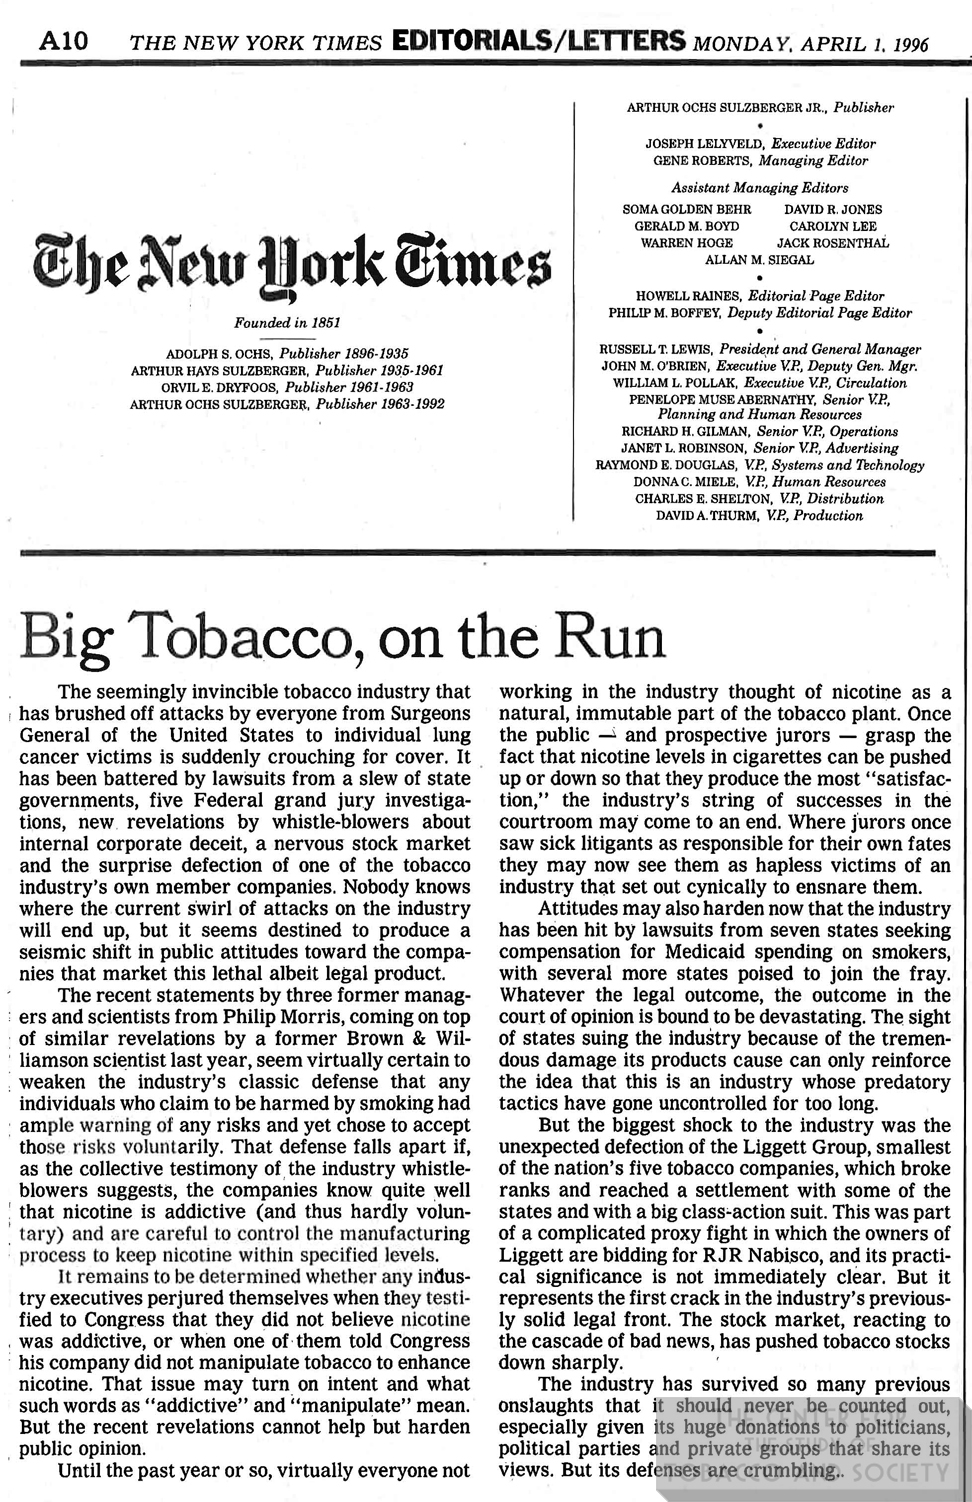 1999 04 01 The New York Times Big tobacco on the run 1